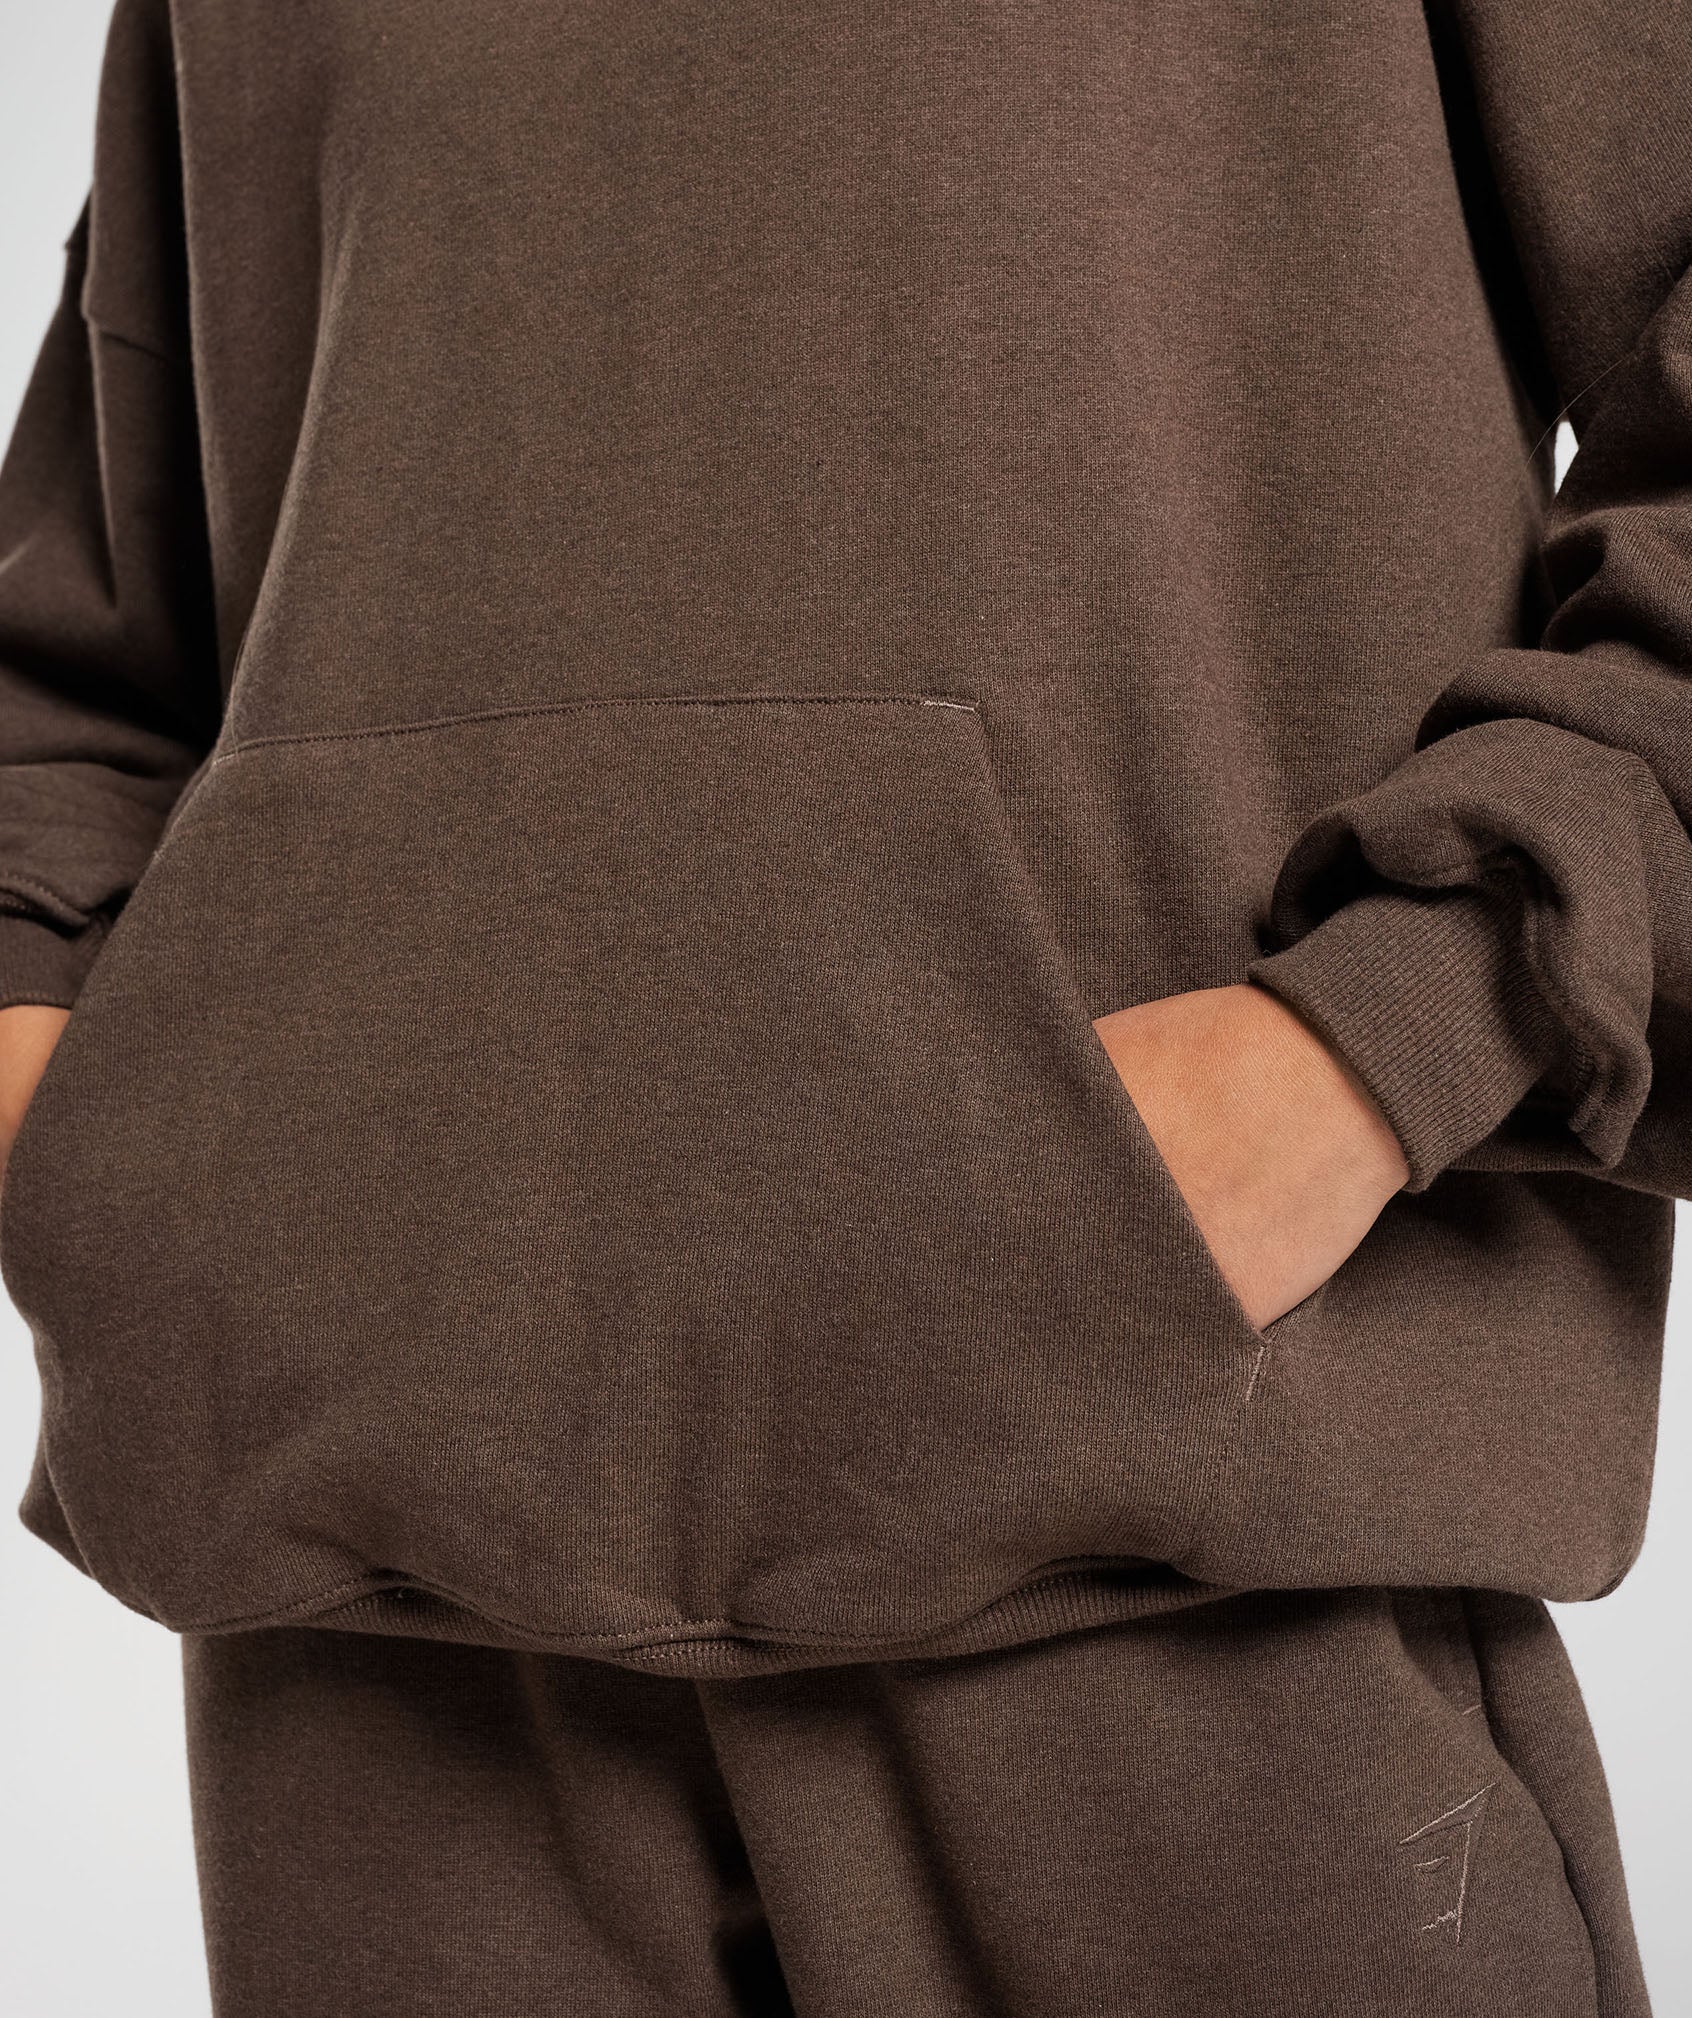 Rest Day Sweats Hoodie in Cozy Brown Marl - view 7